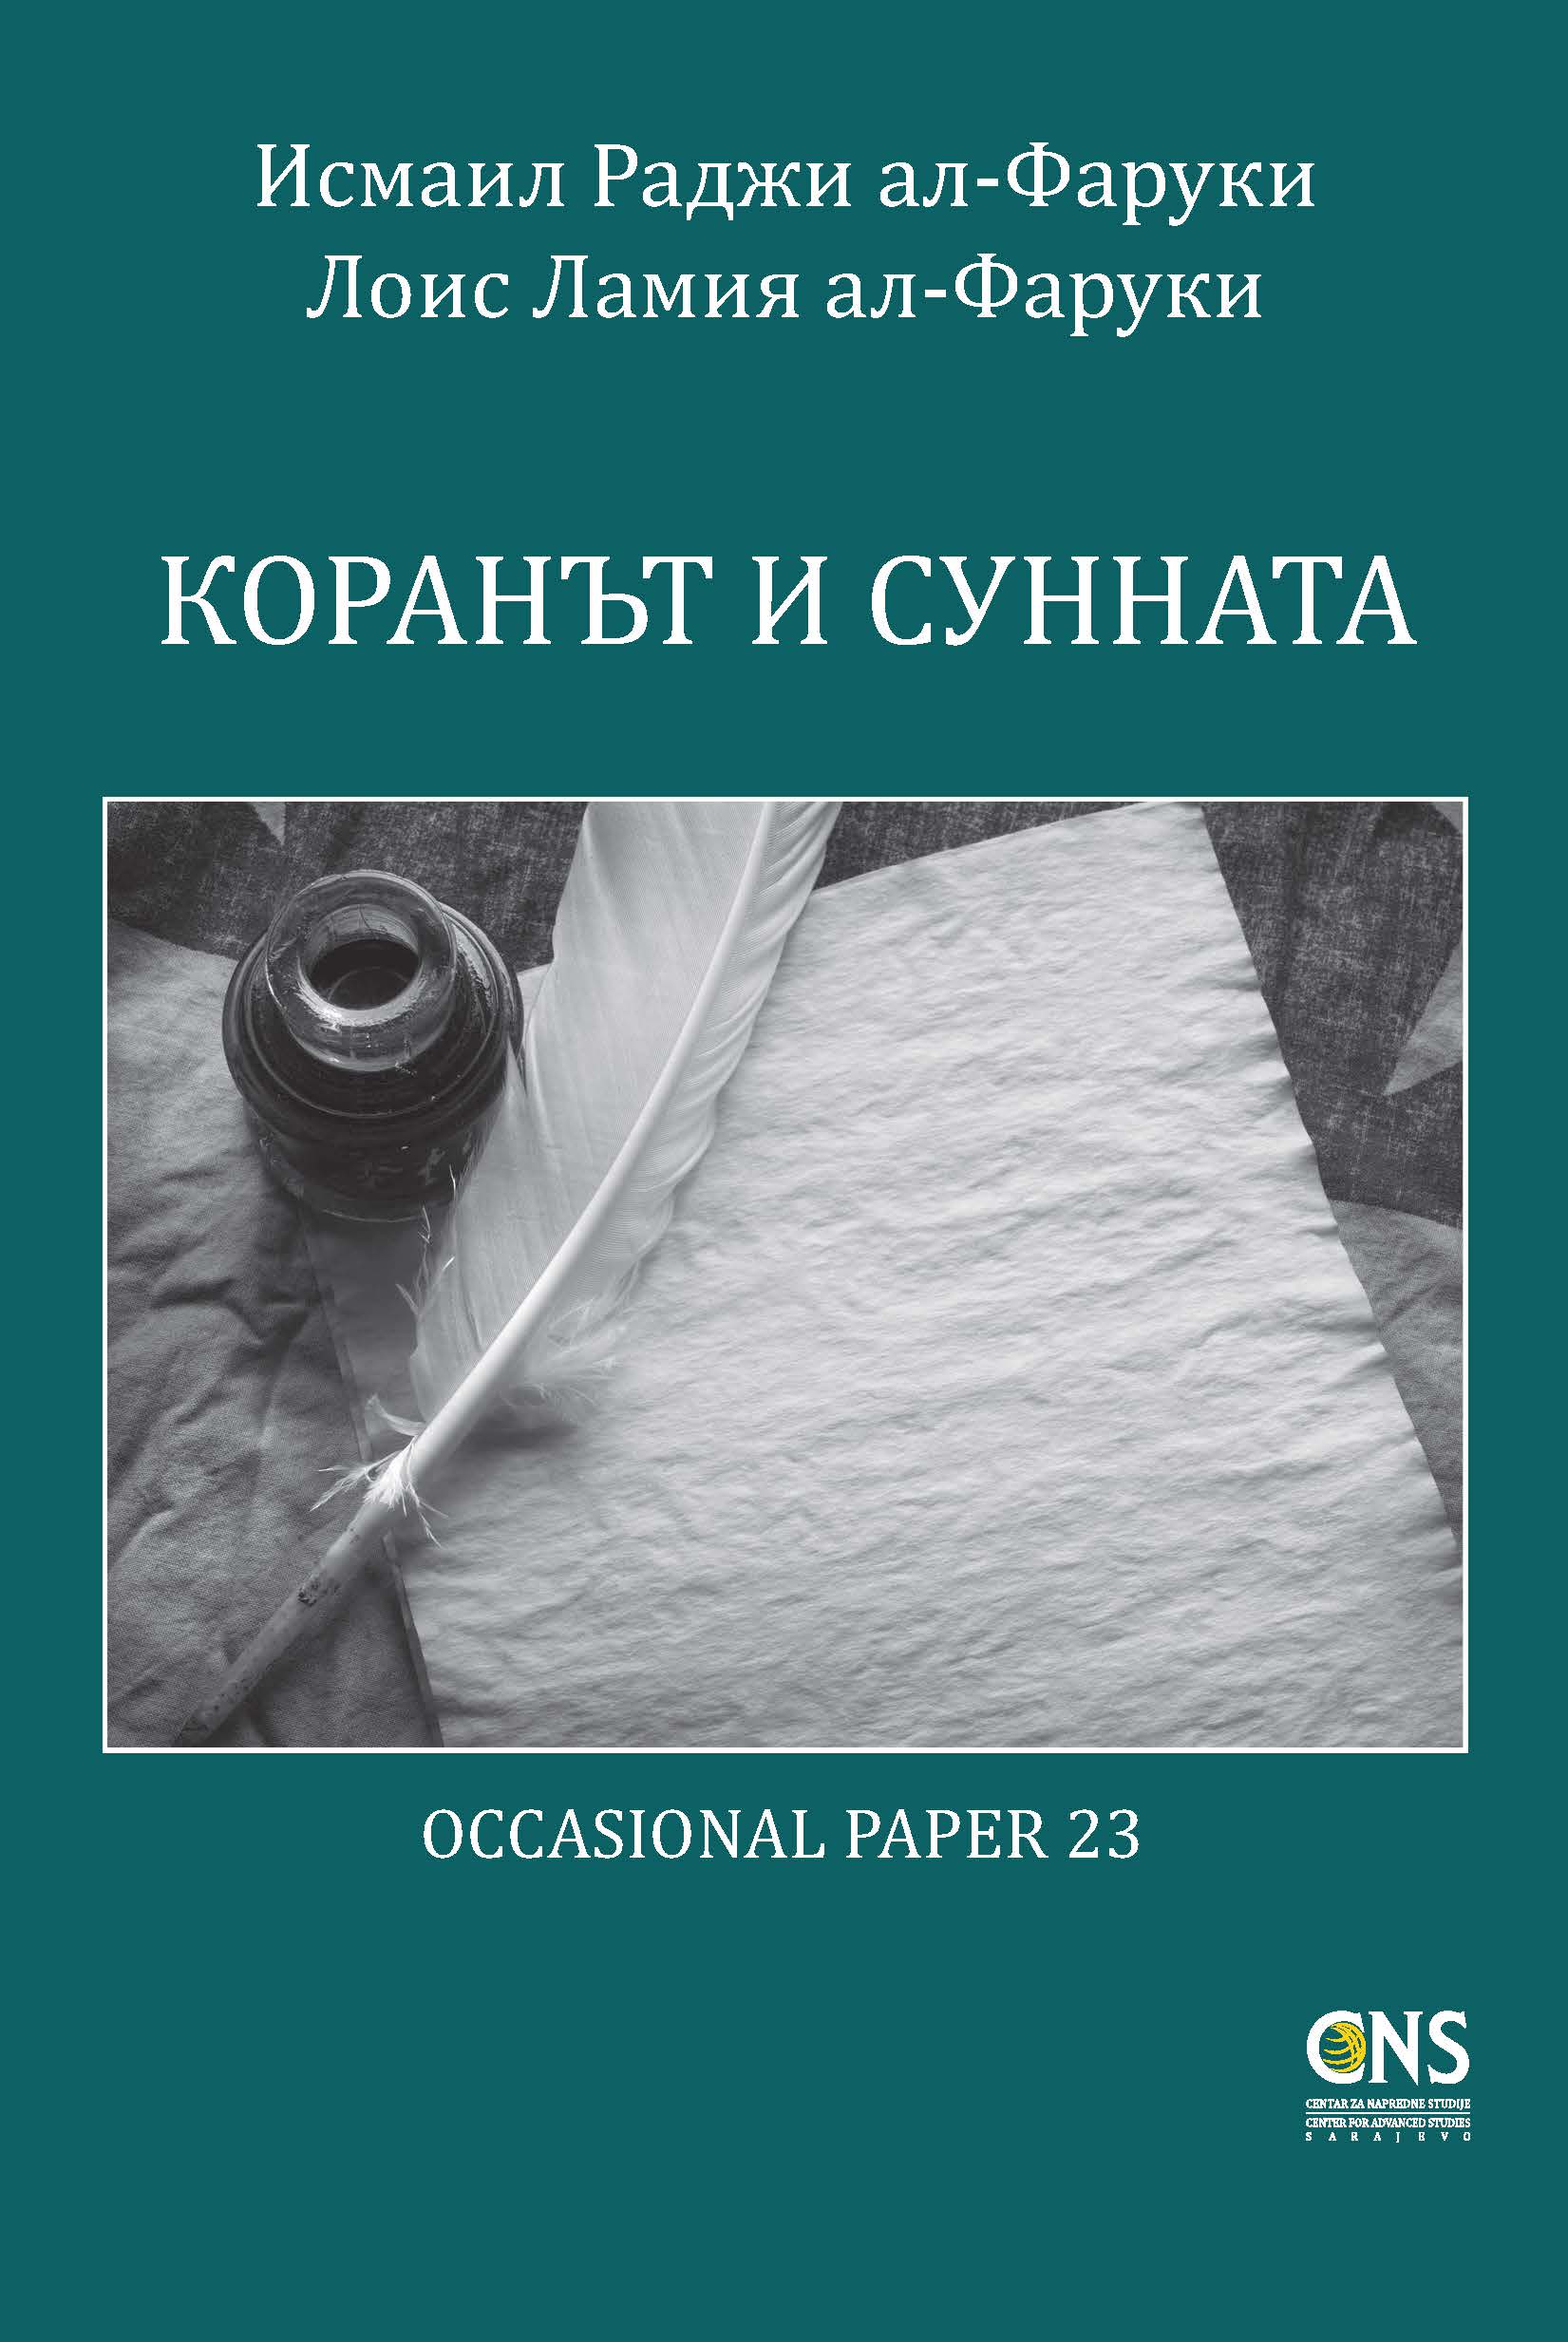 Bulgarian: Коранът и Сунната (The Qur’an and the Sunnah – Occasional Paper)